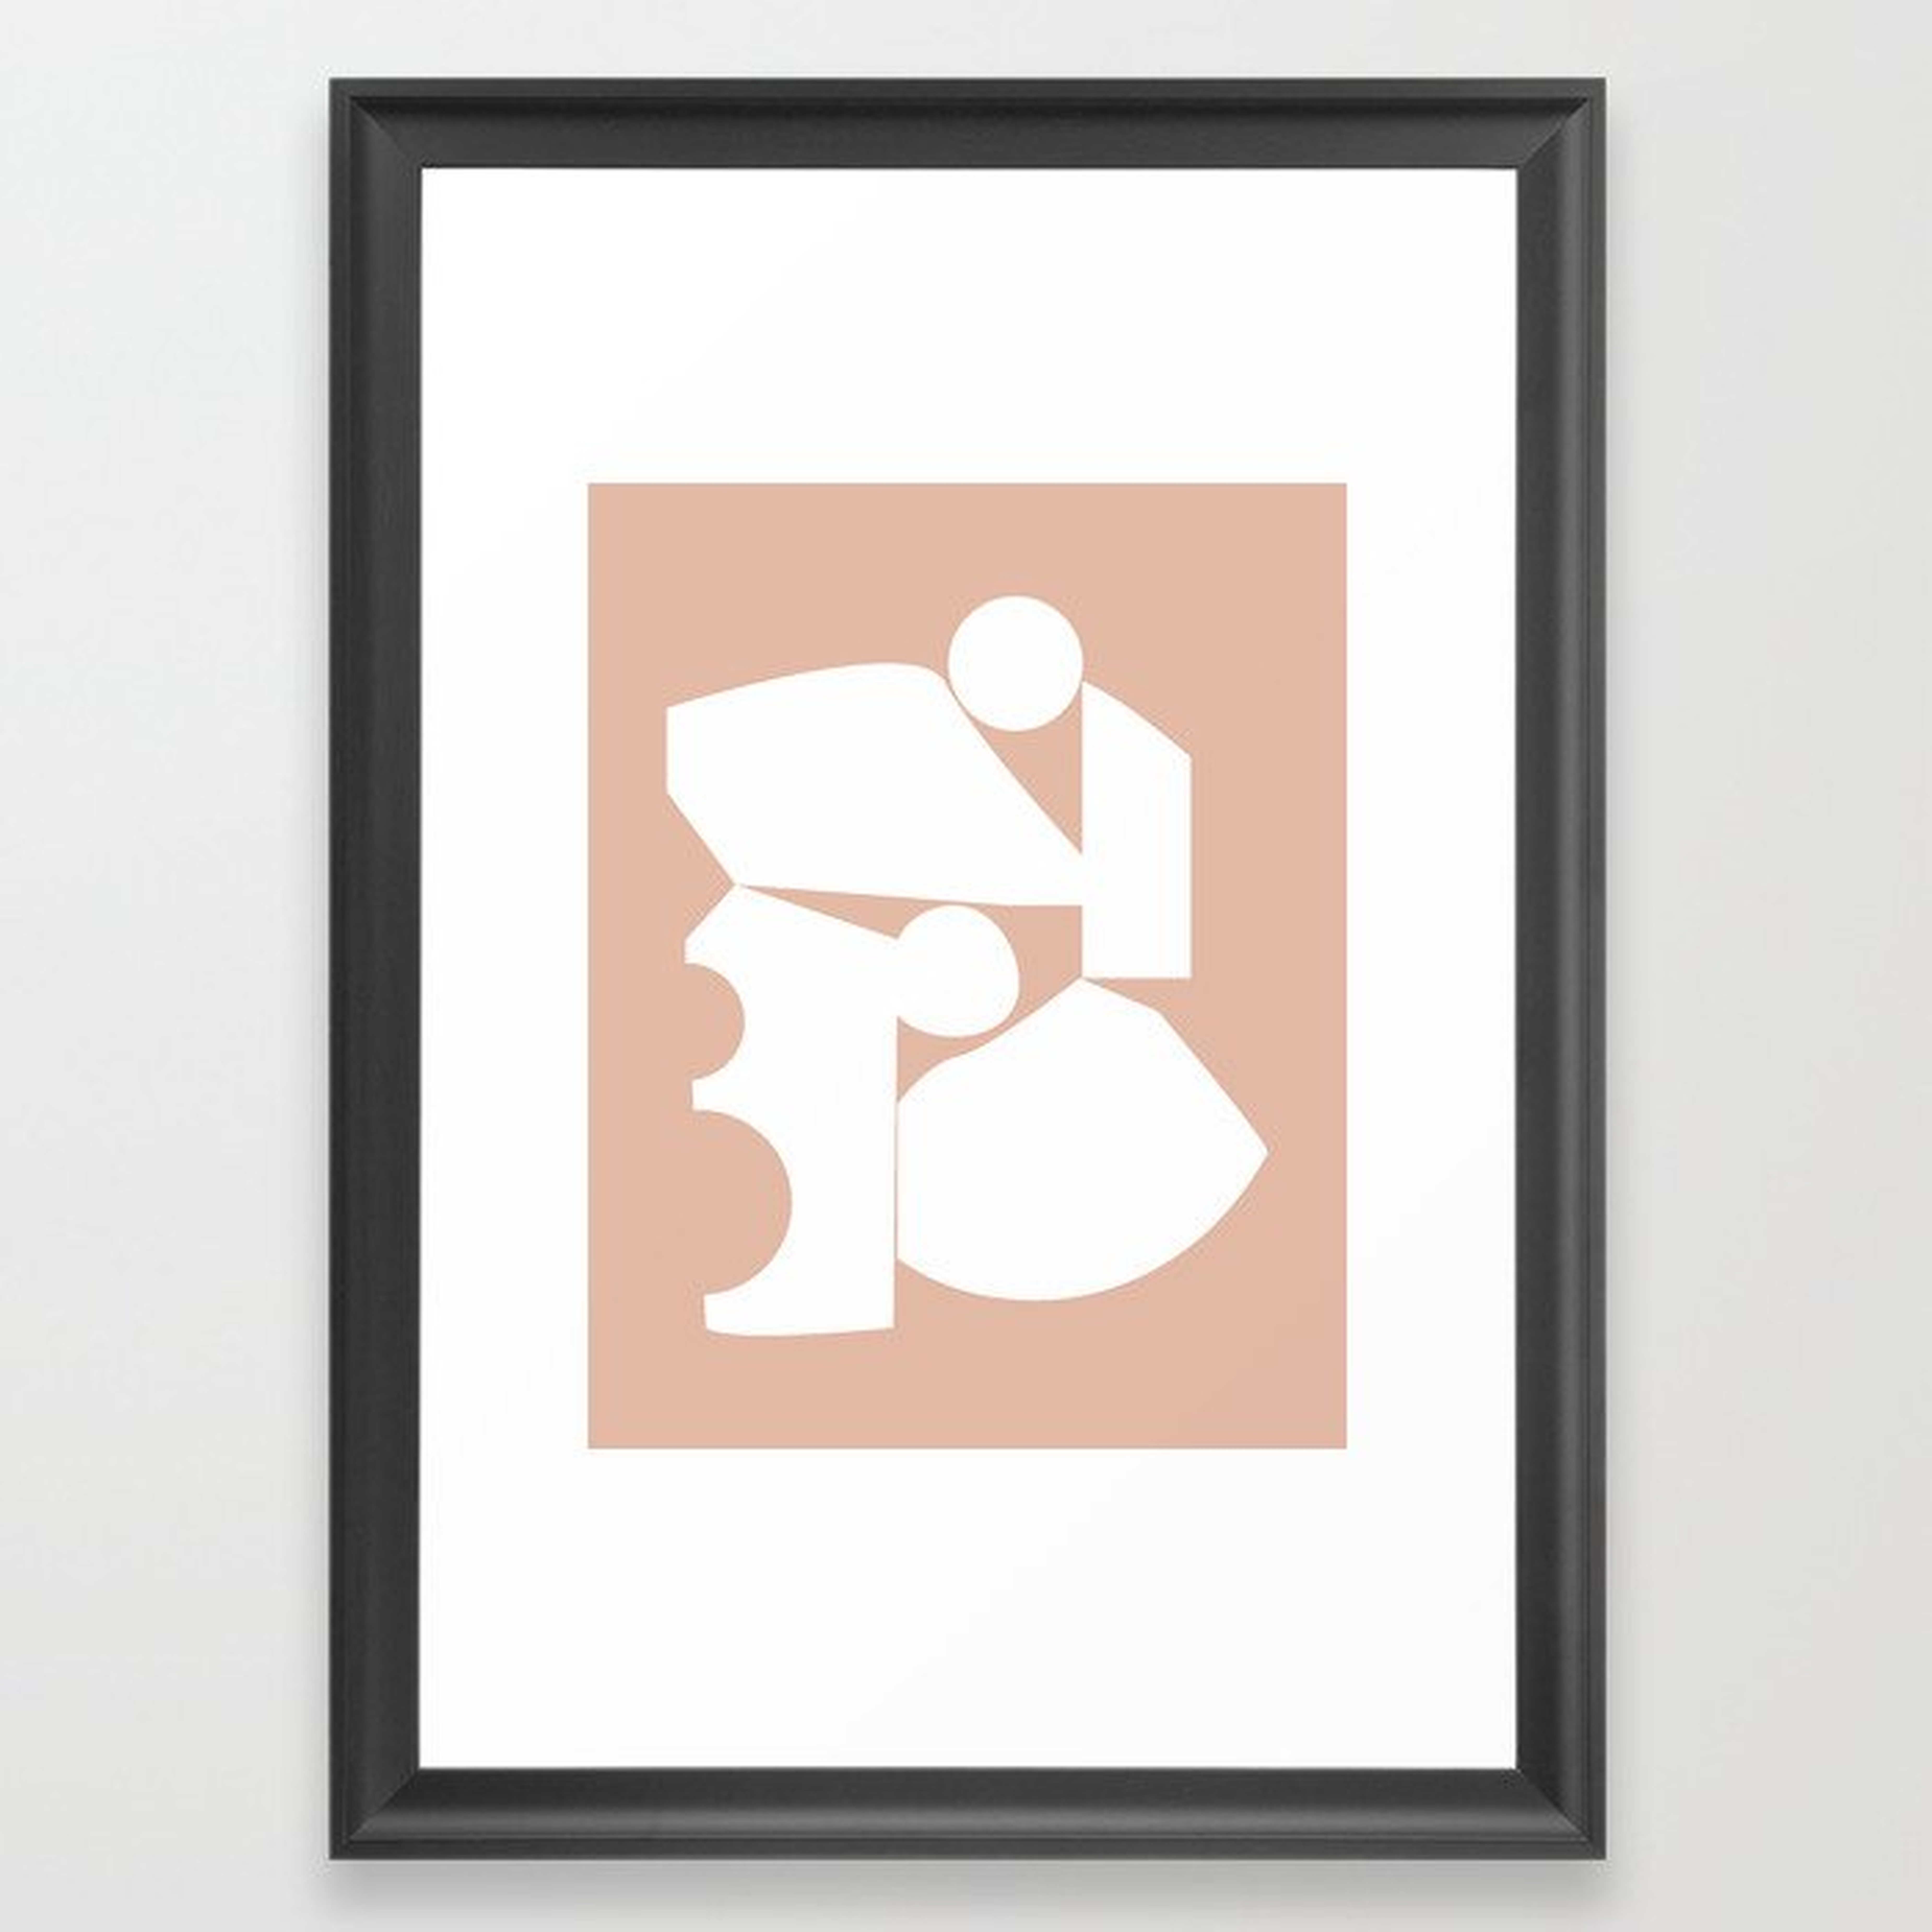 Shape study #16 - Inside Out Collection Framed Art Print by Mpgmb - Society6